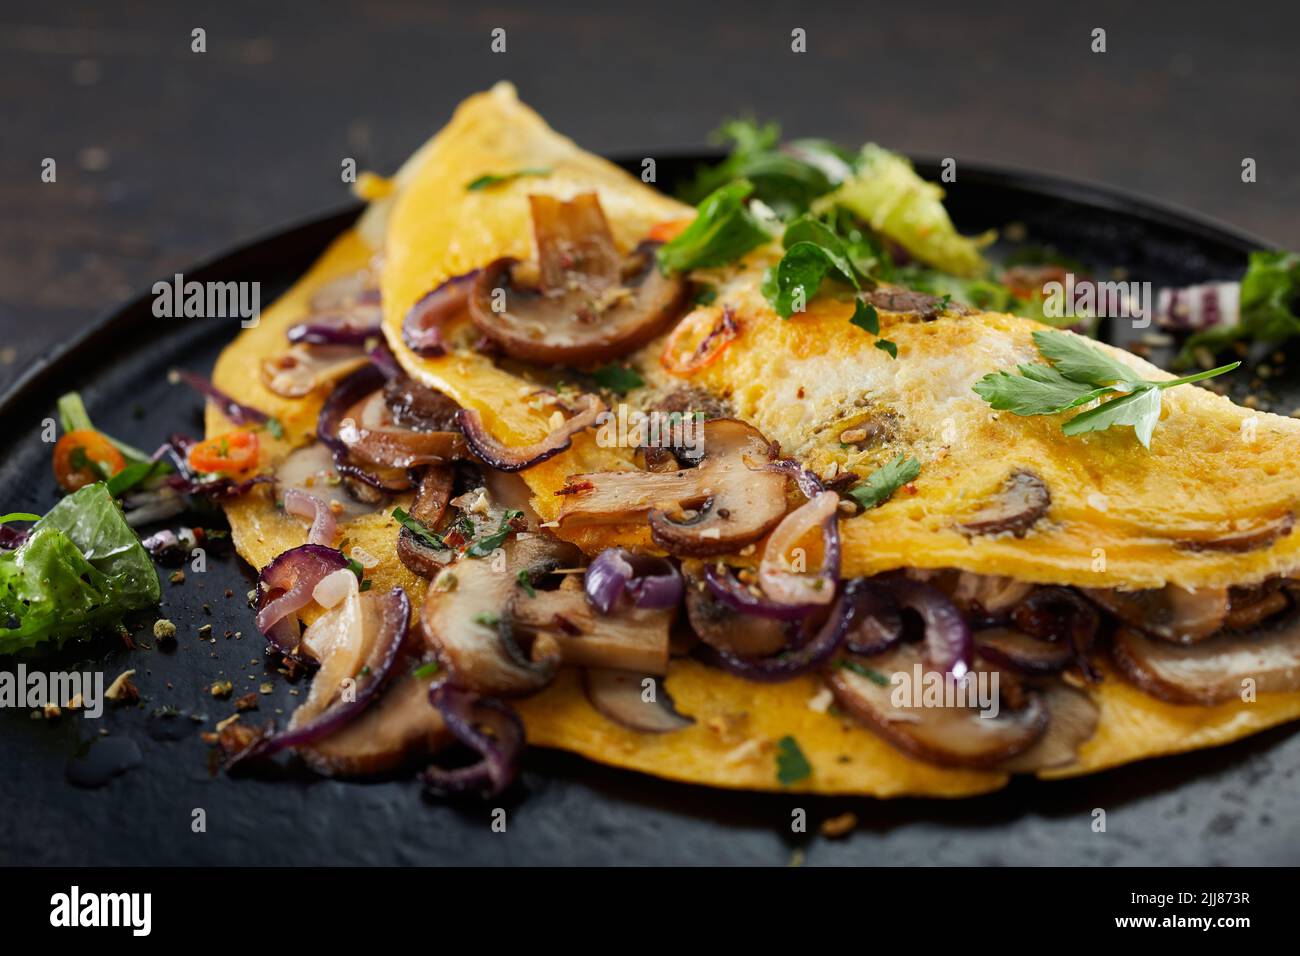 Closeup of delicious omelet with mushrooms and herbs served on table for lunch Stock Photo